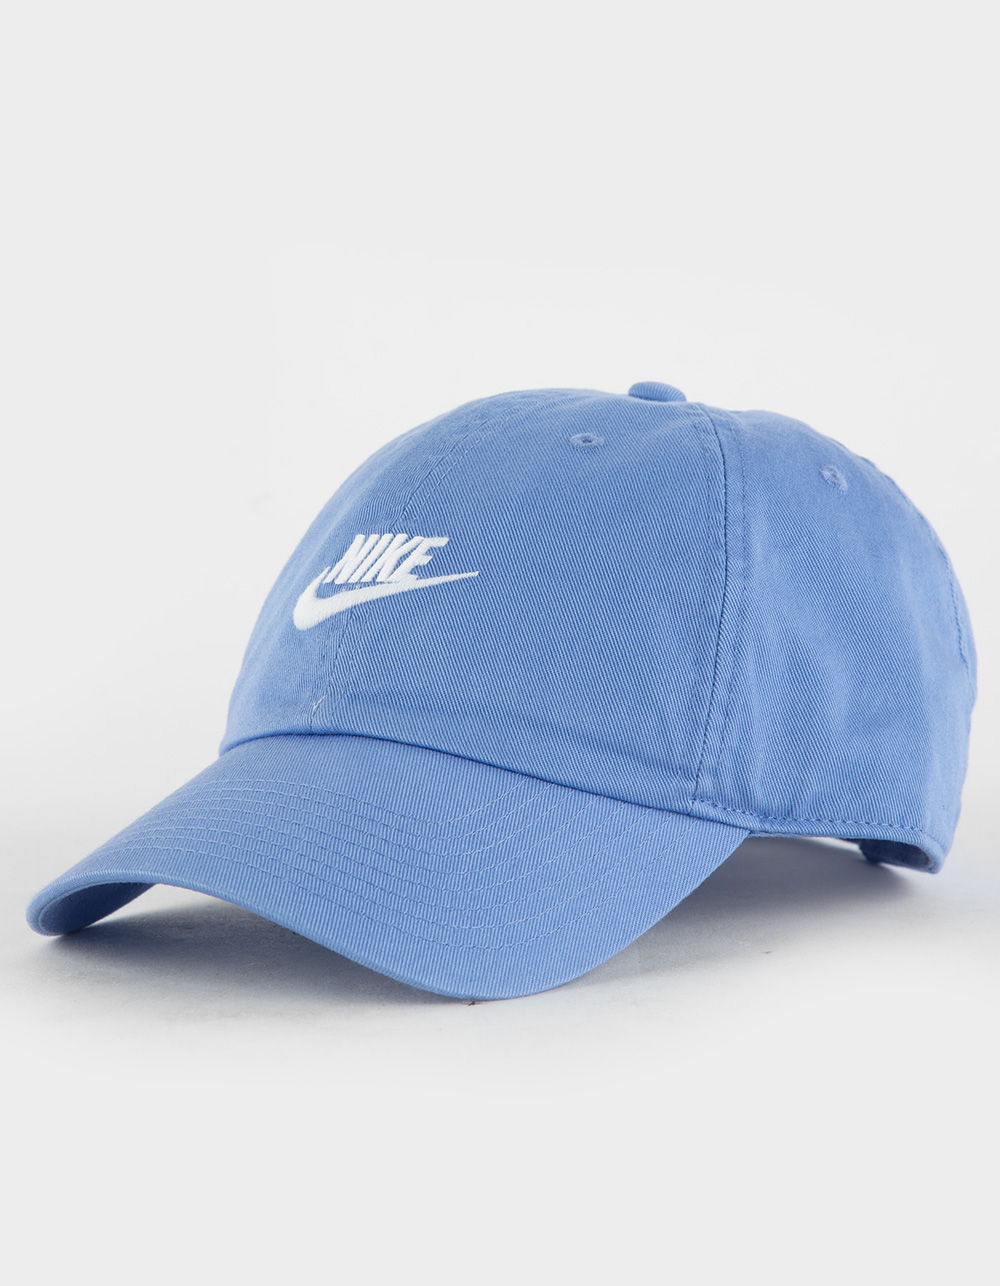 NIKE Heritage86 Futura Washed Hat - BABY BLUE | Tillys